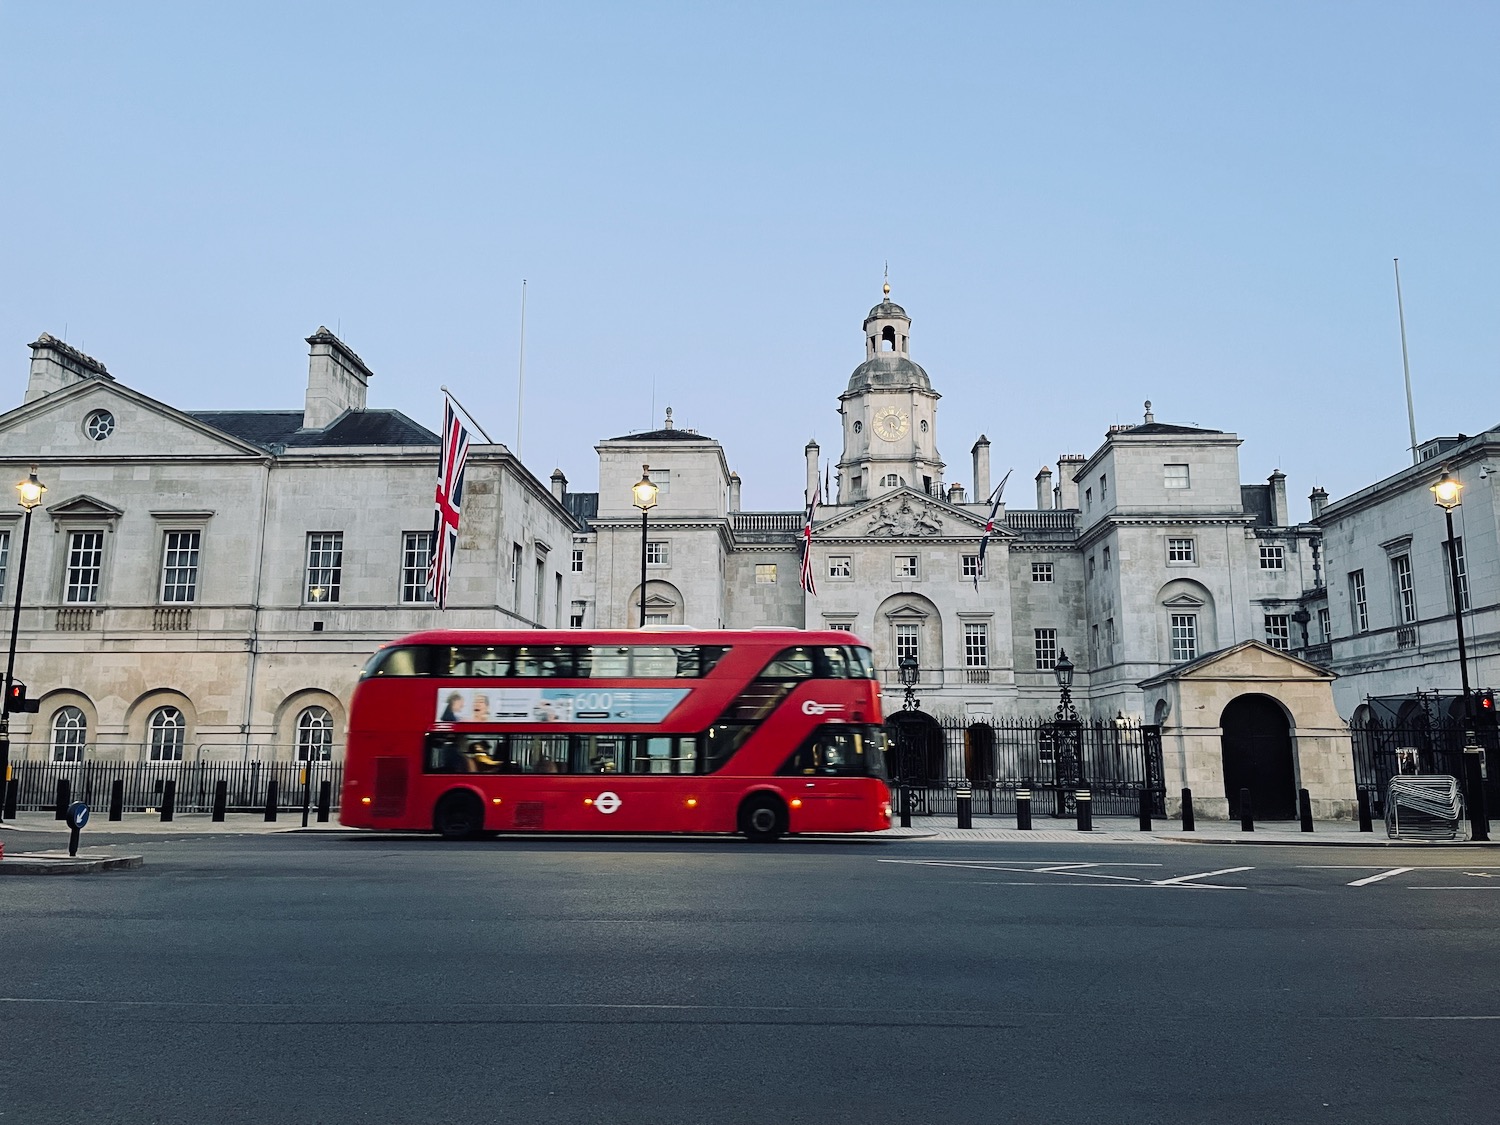 a red double decker bus in front of Horse Guards